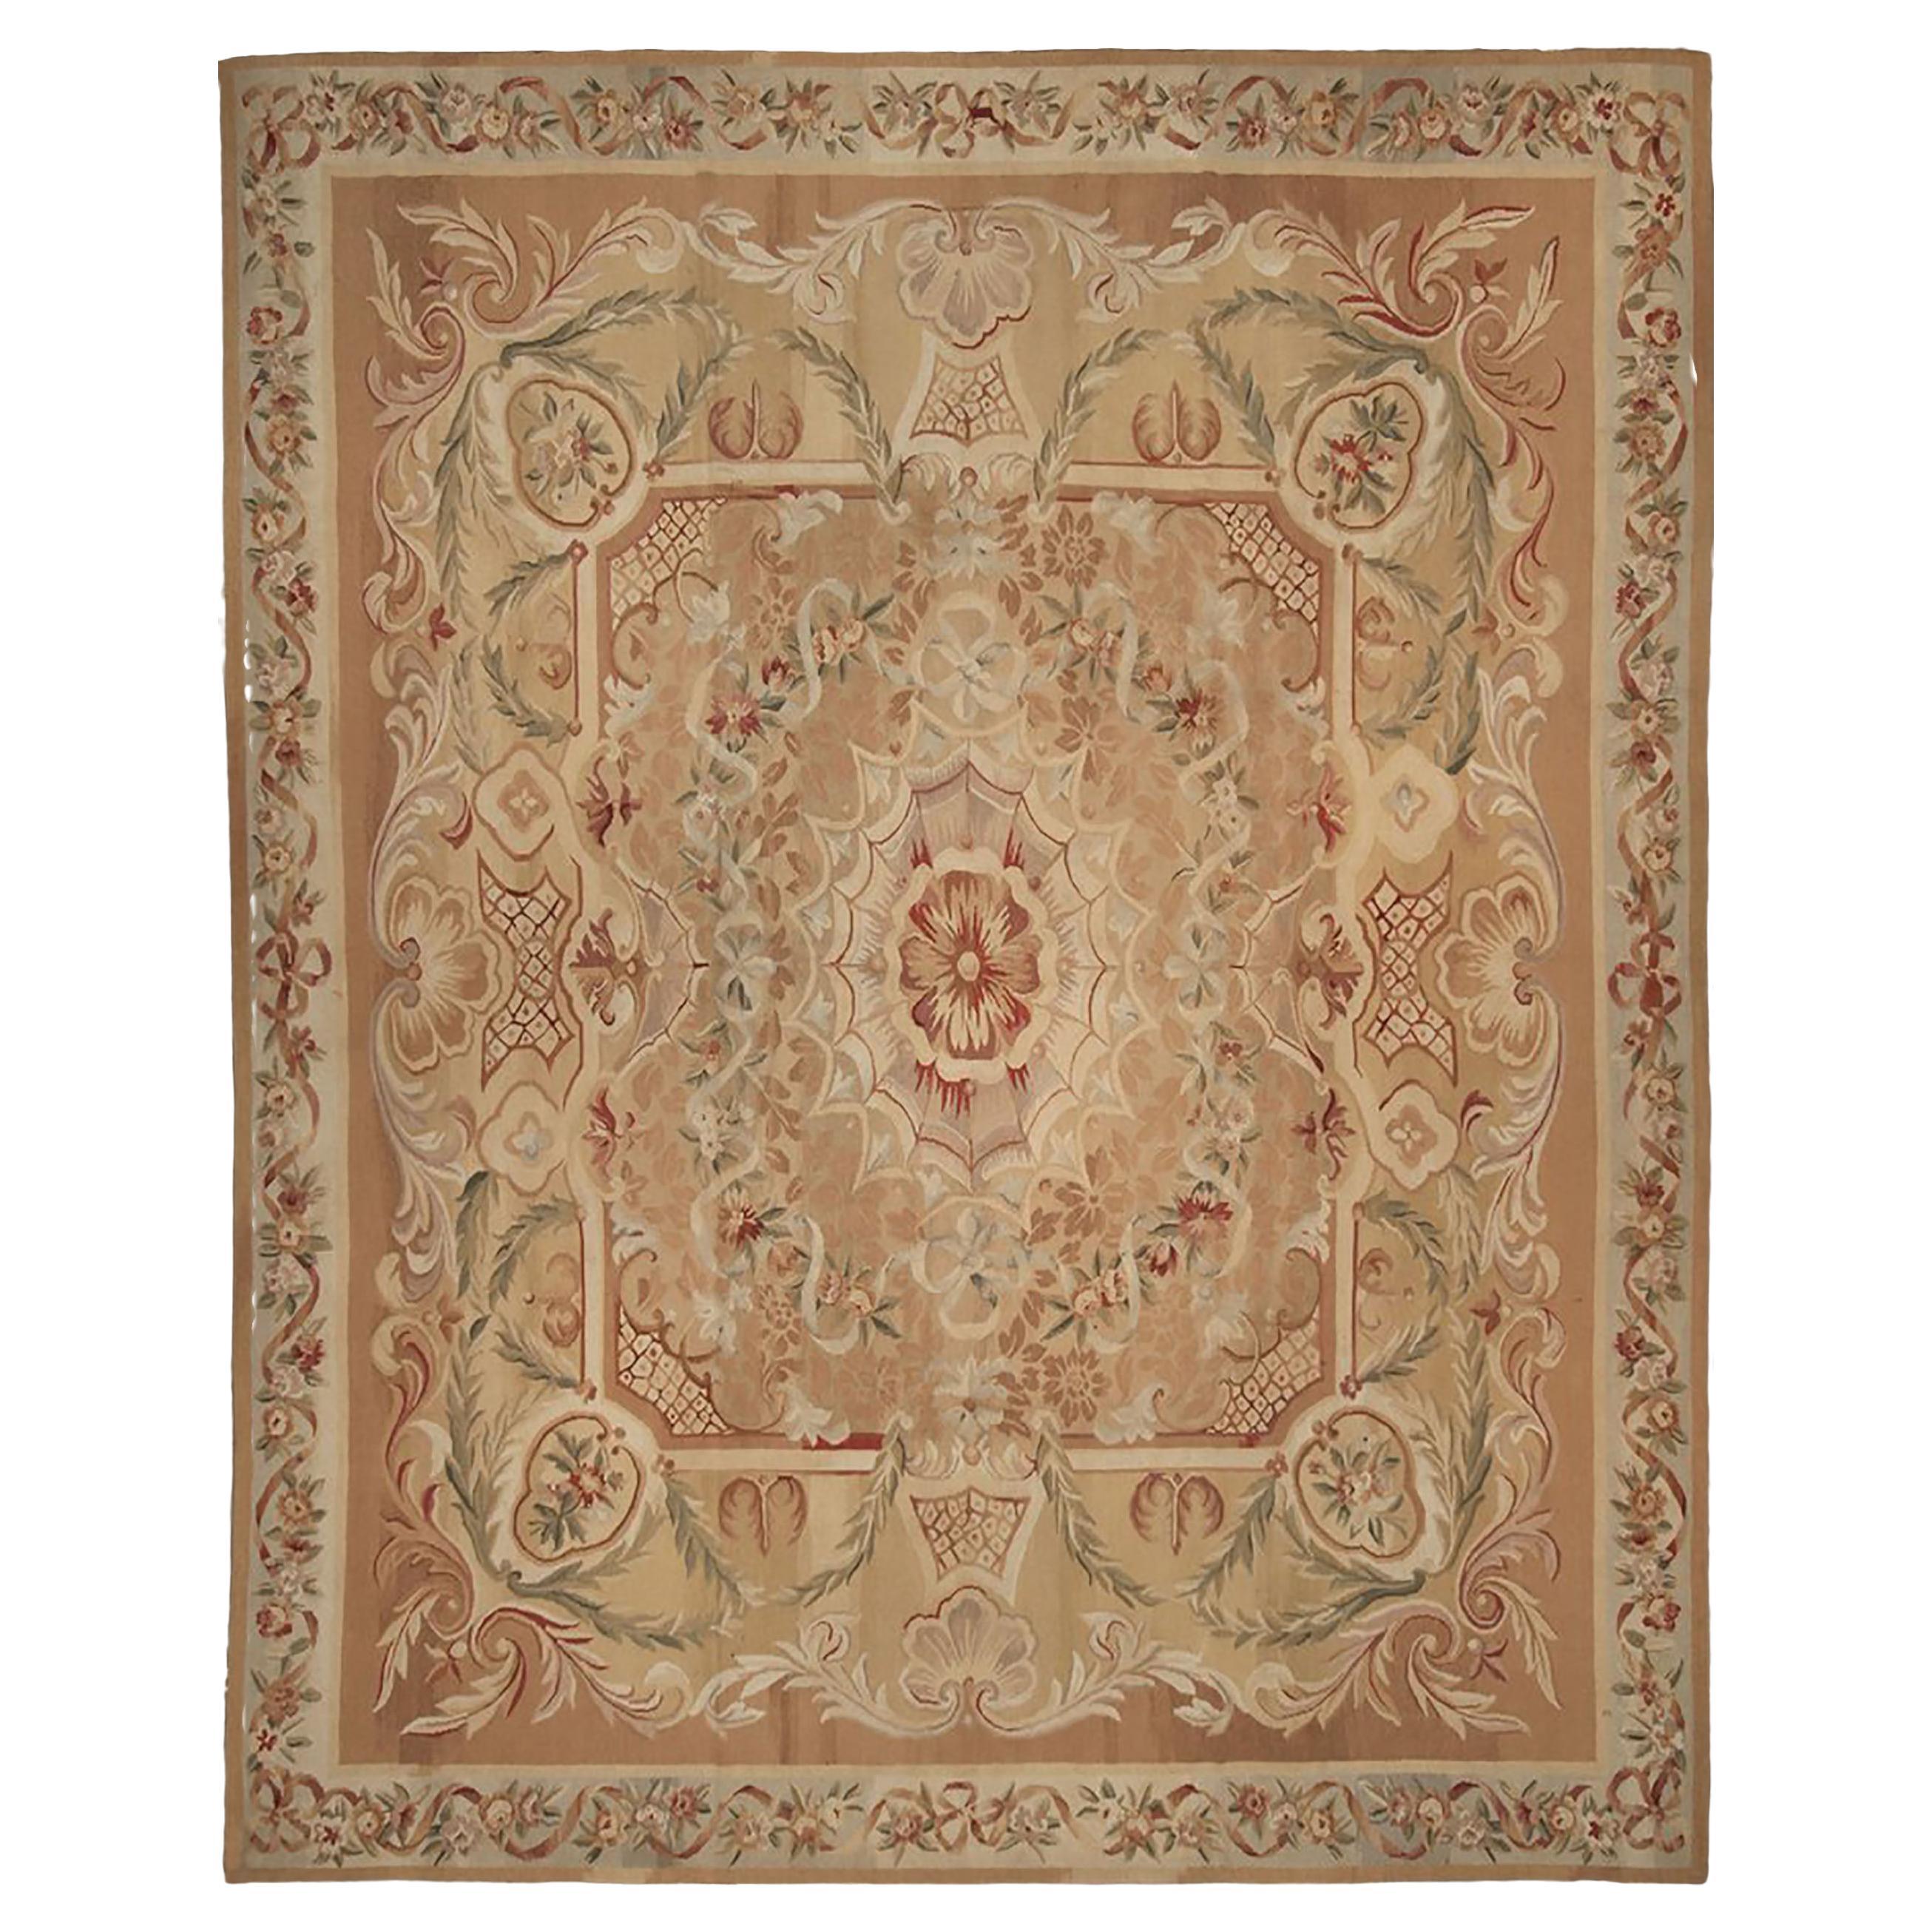 Rug & Kilim’s European Style Aubusson Rug in Brown and Green Floral Pattern